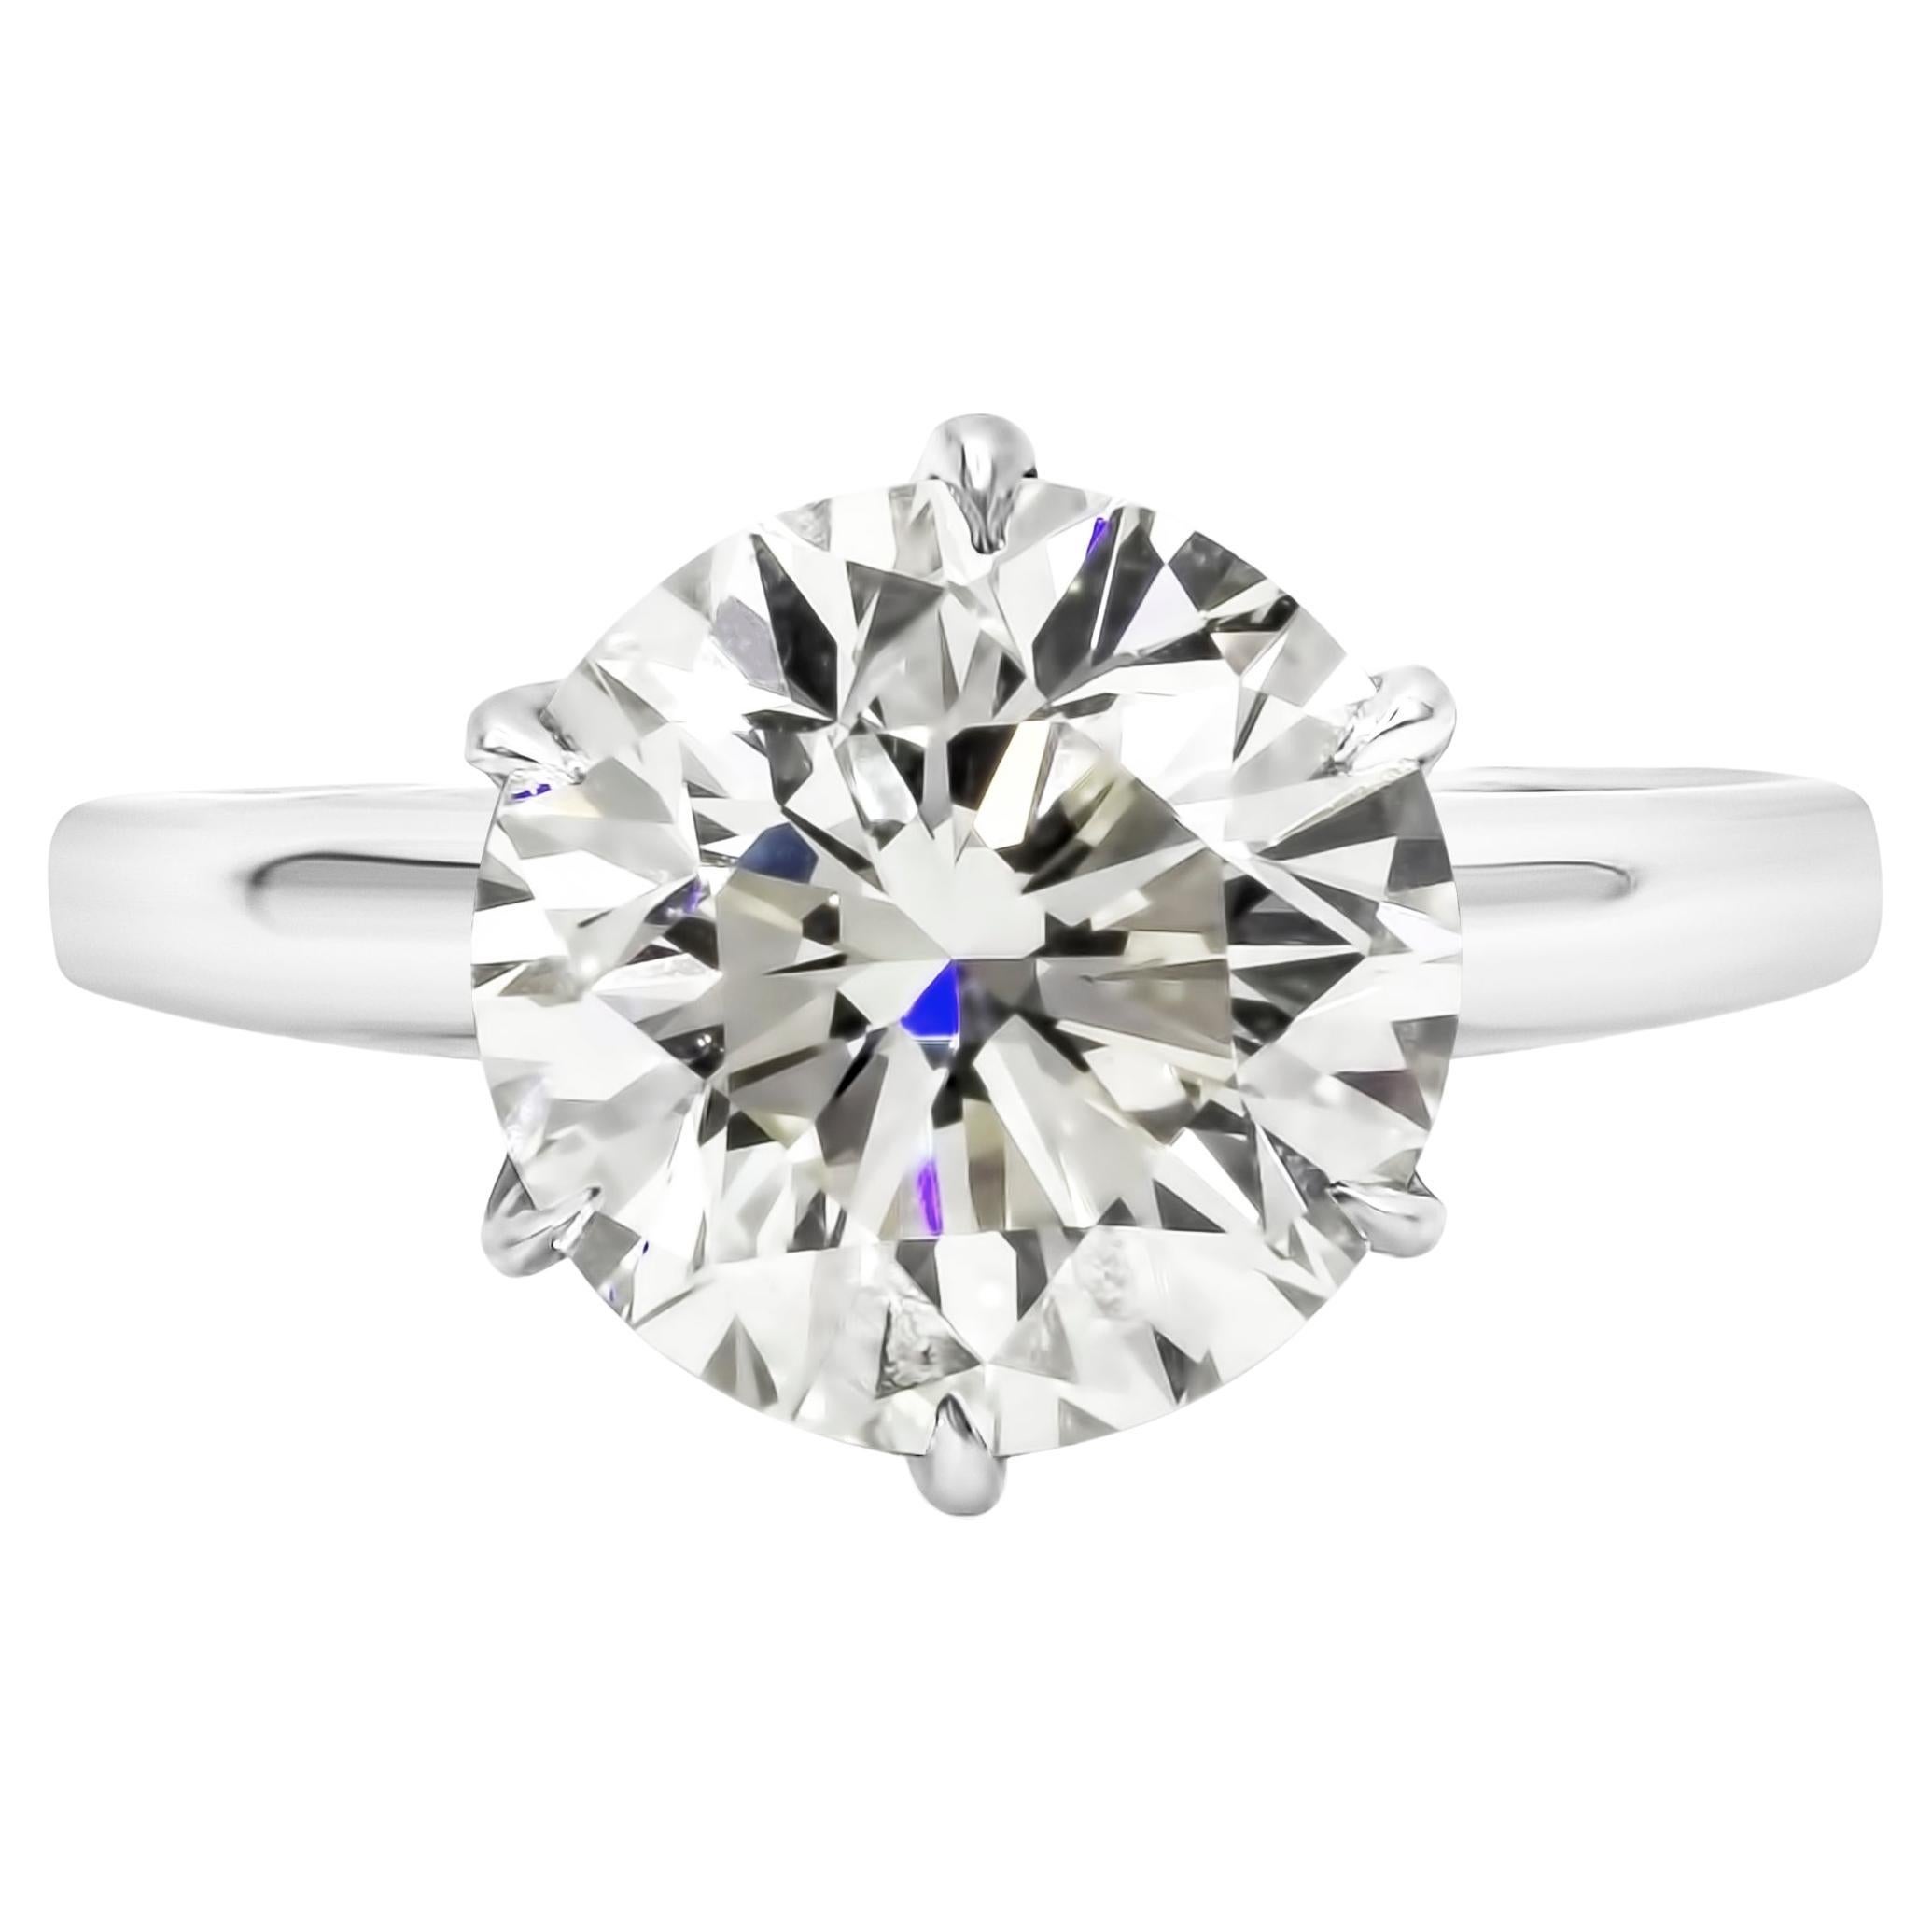 Roman Malakov GIA Certified 4.01 Carat Round Diamond Solitaire Engagement Ring For Sale